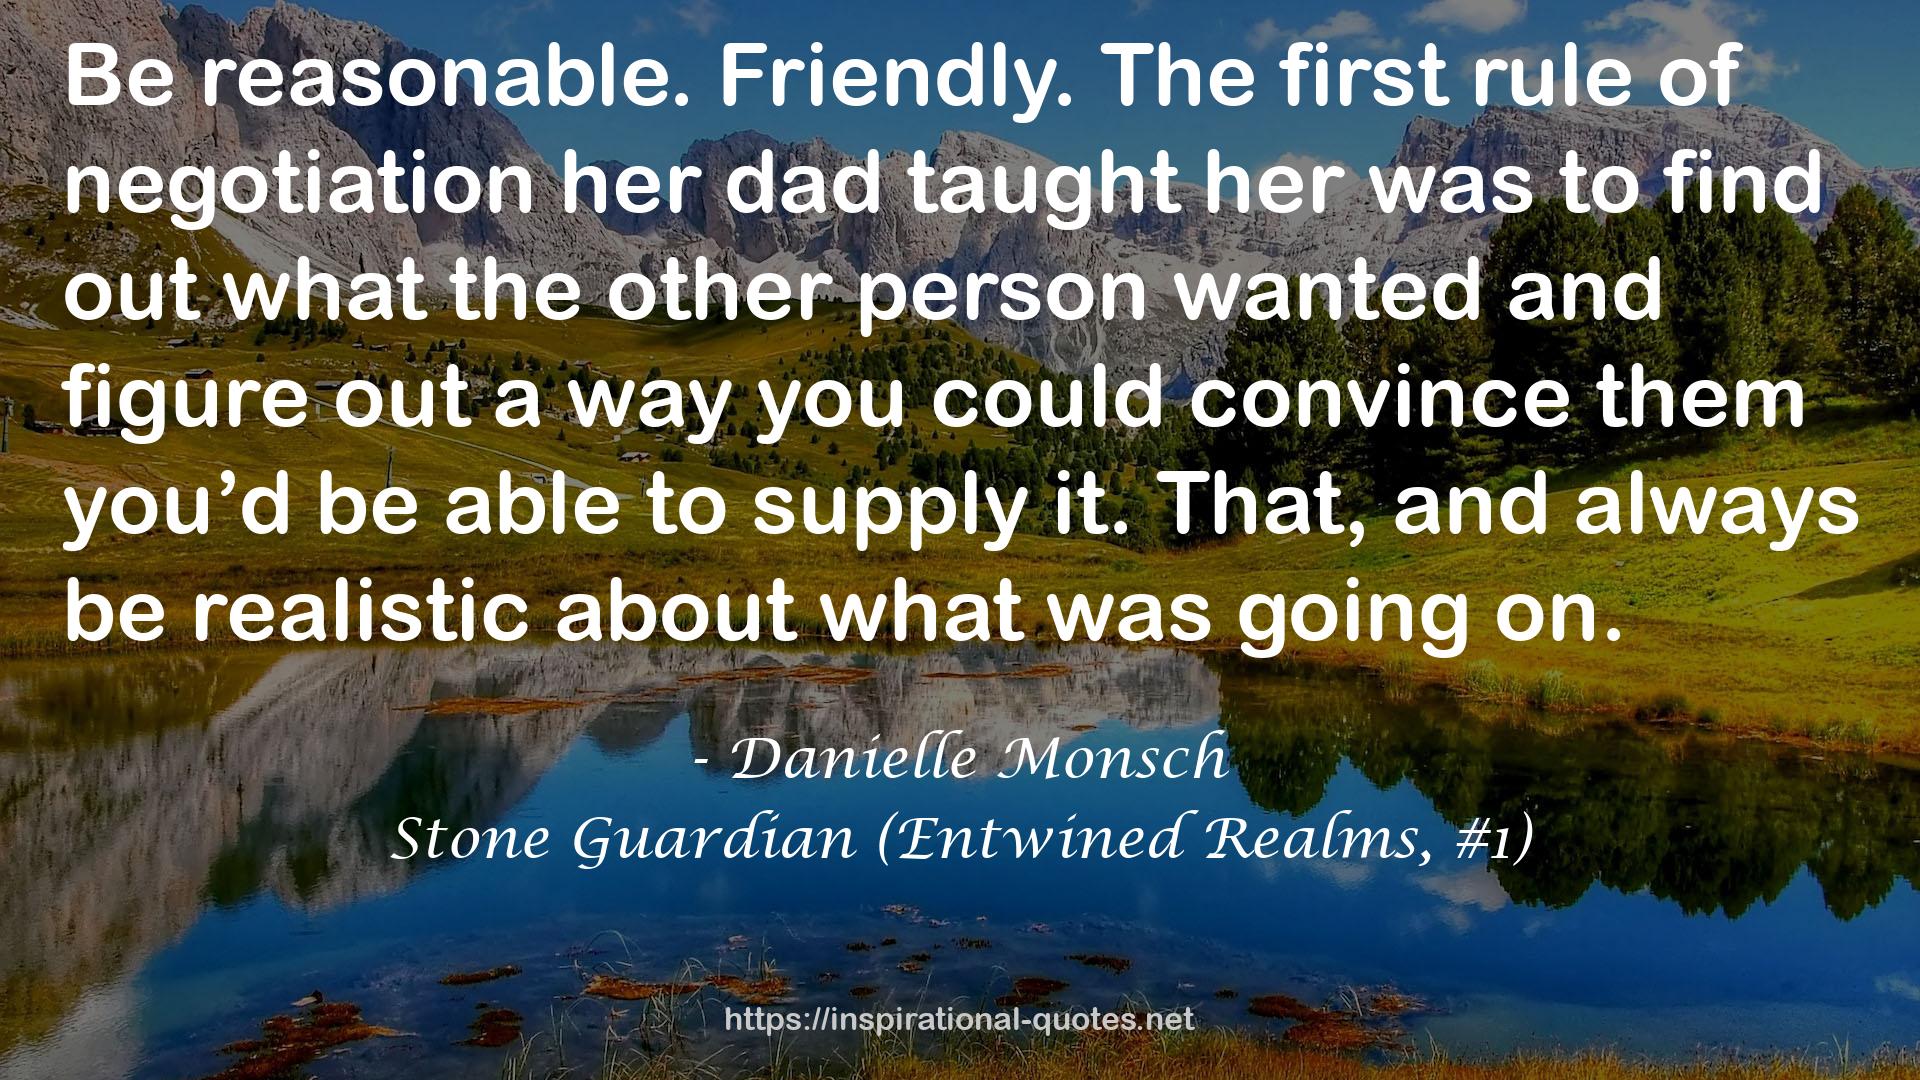 Stone Guardian (Entwined Realms, #1) QUOTES